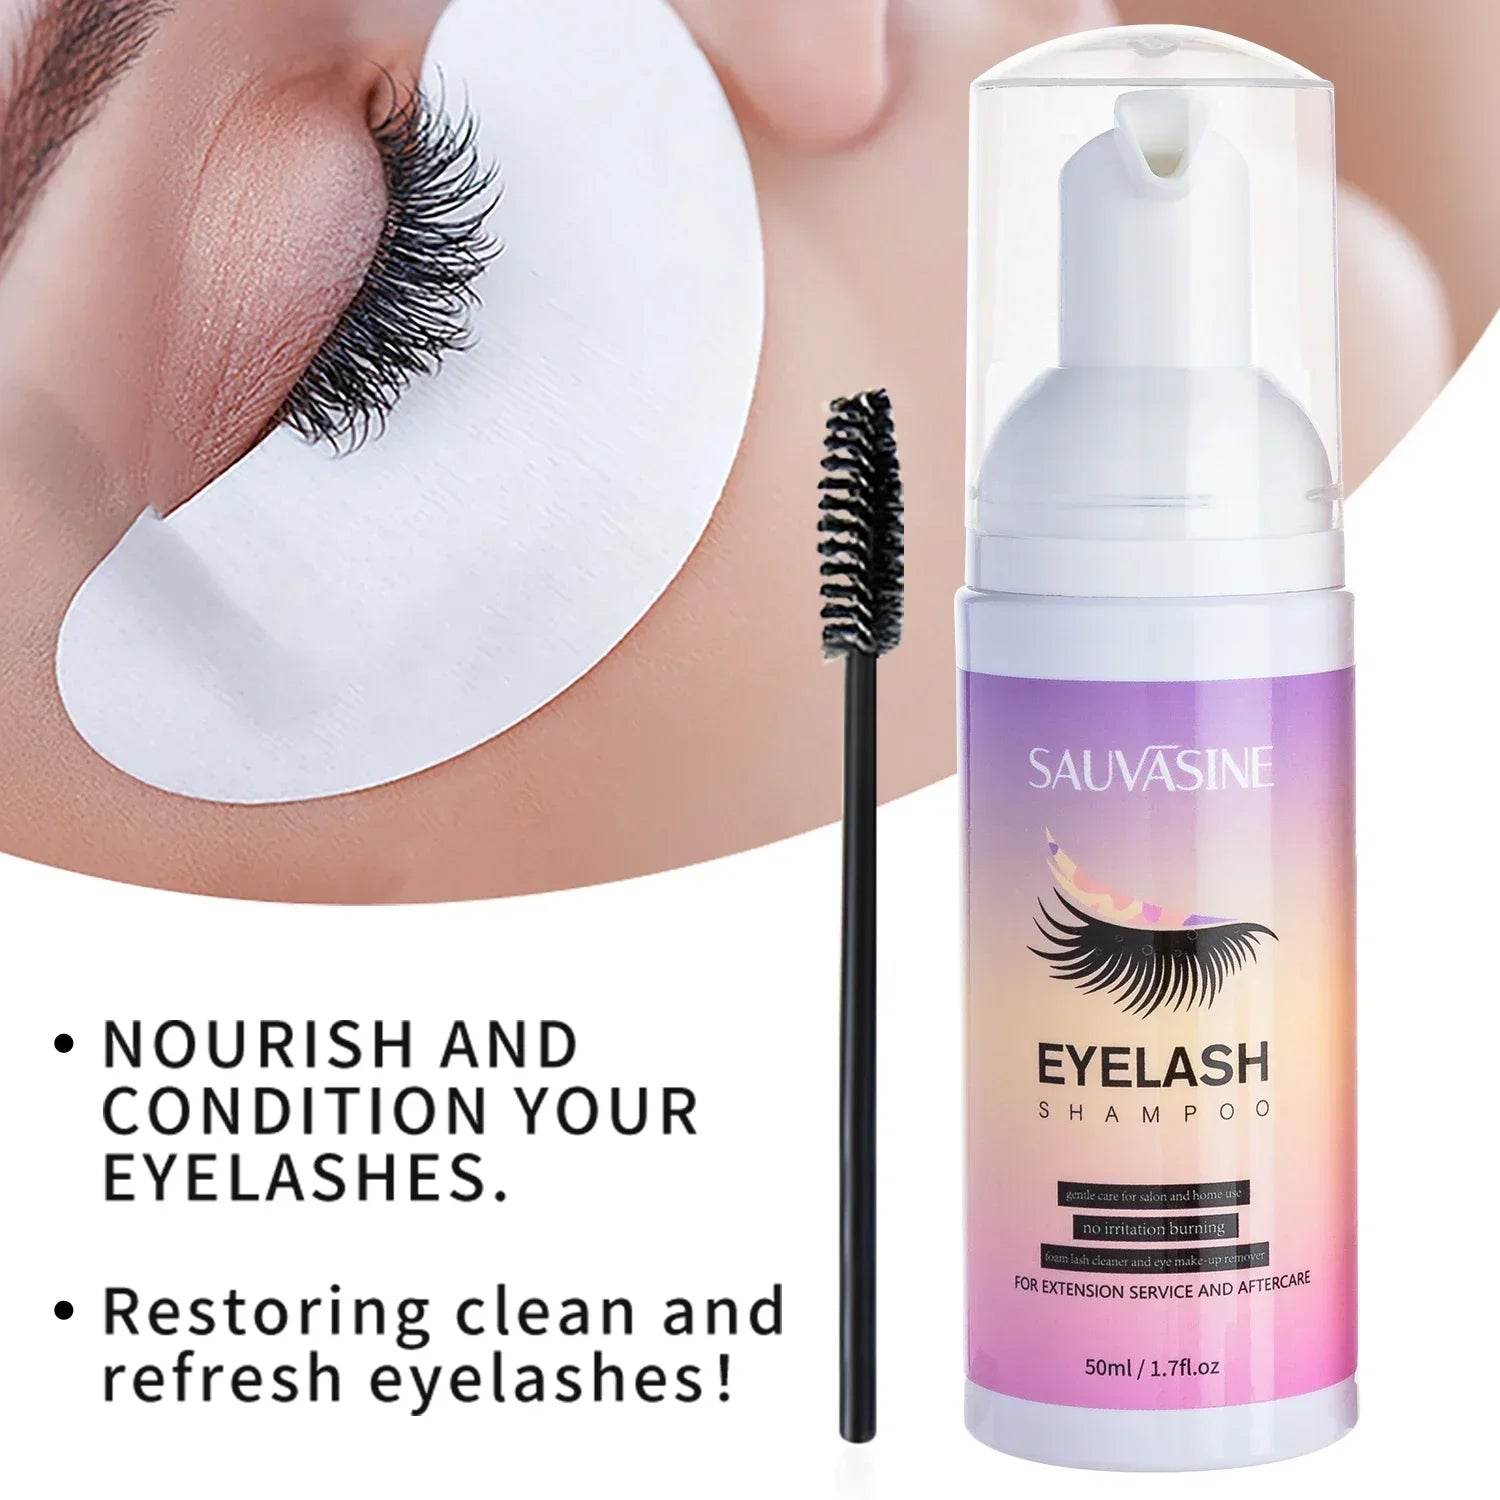 Foaming Lash Shampoo - Buy 1 Get 1 Free Automatically with Free Shipping!